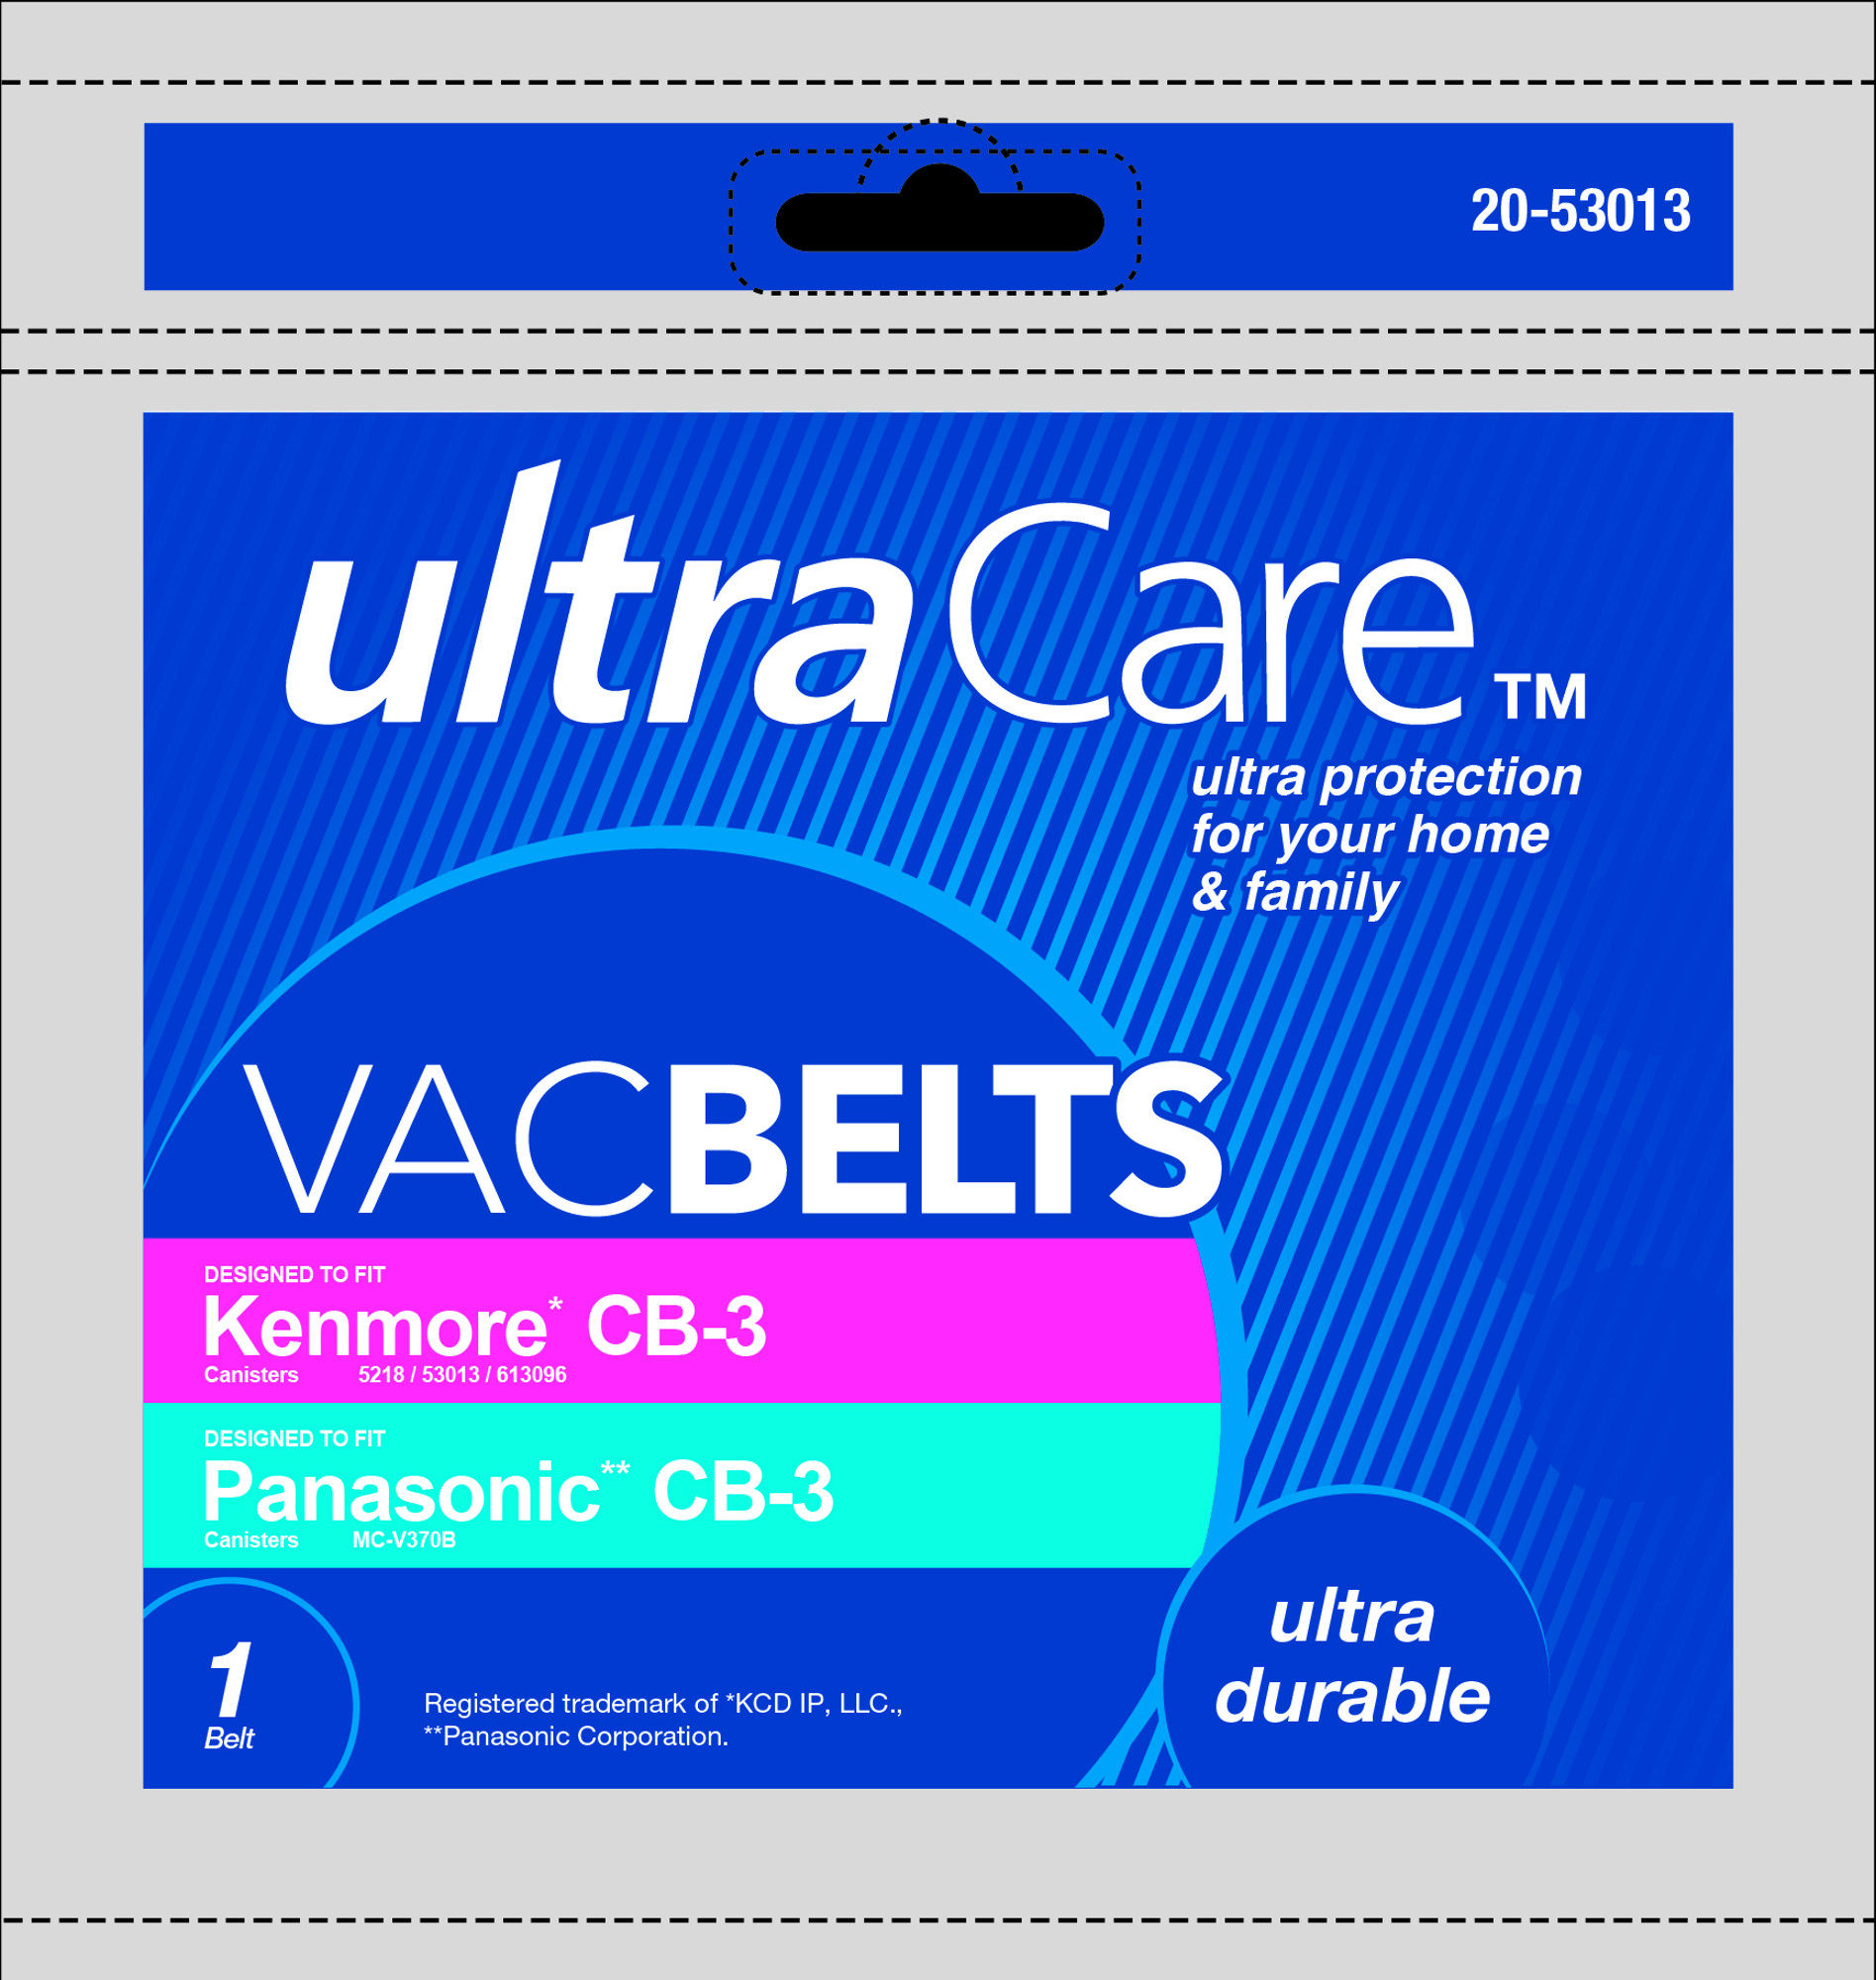 UltraCare UCB8213-6  Vacuum Belt for Kenmore&#8482; type CB-3; Panasonic type CB-3 Canisters - 1 belt